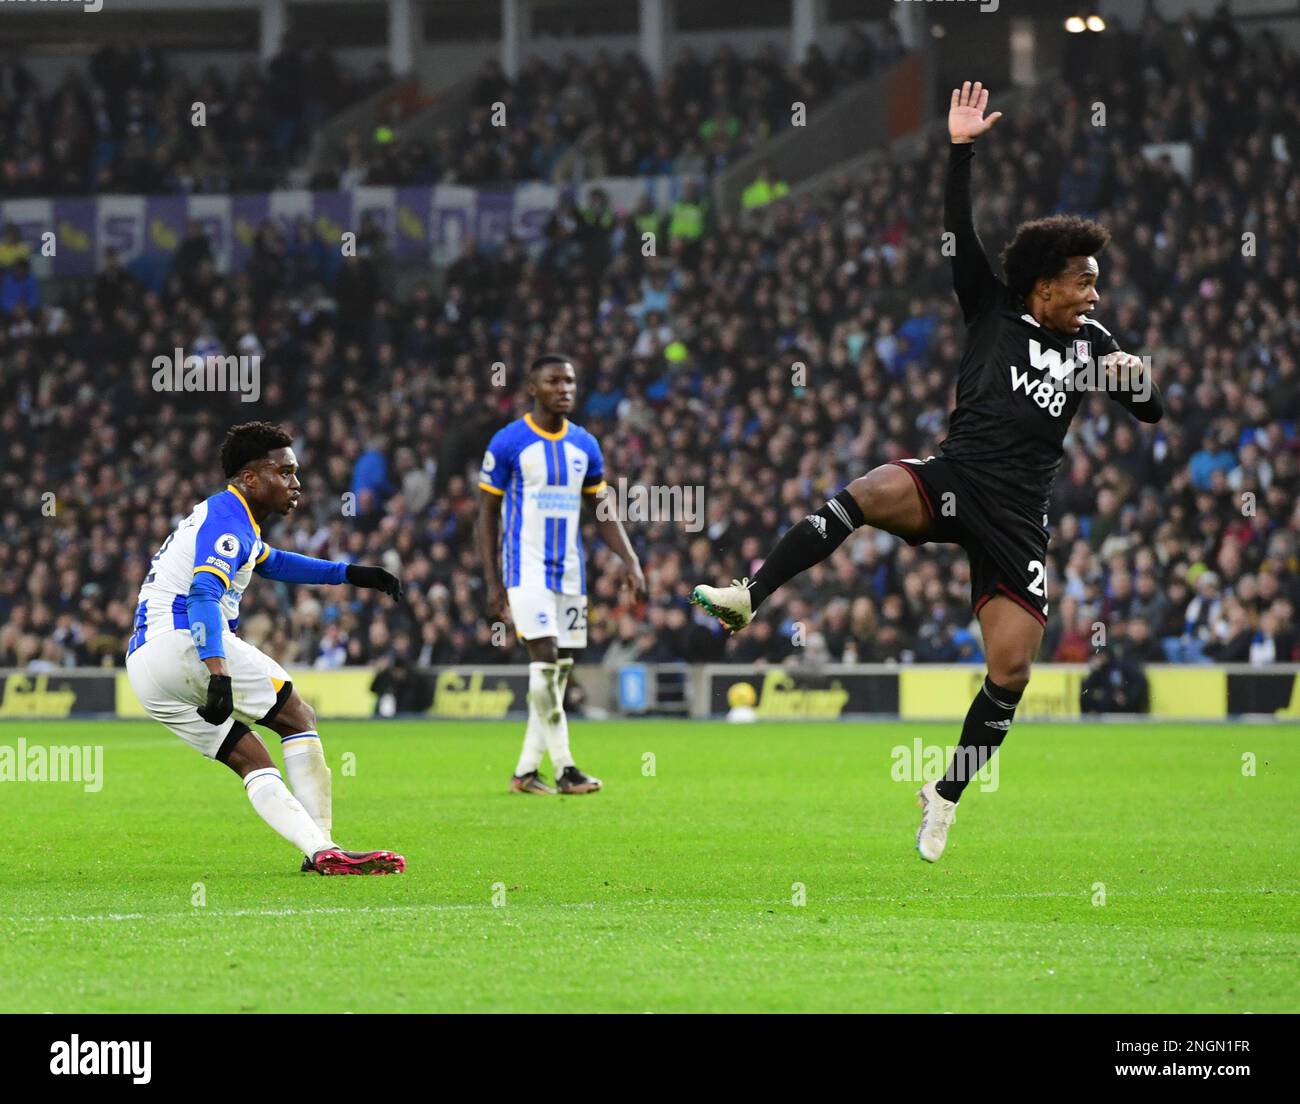 Brighton, UK. 18th Feb, 2023. Willian Borges Da Silva of Fulham FC jumps to stop the shot on goal by Tariq Lamptey of Brighton and Hove Albion during the Premier League match between Brighton & Hove Albion and Fulham at The Amex on February 18th 2023 in Brighton, England. (Photo by Jeff Mood/phcimages.com) Credit: PHC Images/Alamy Live News Stock Photo